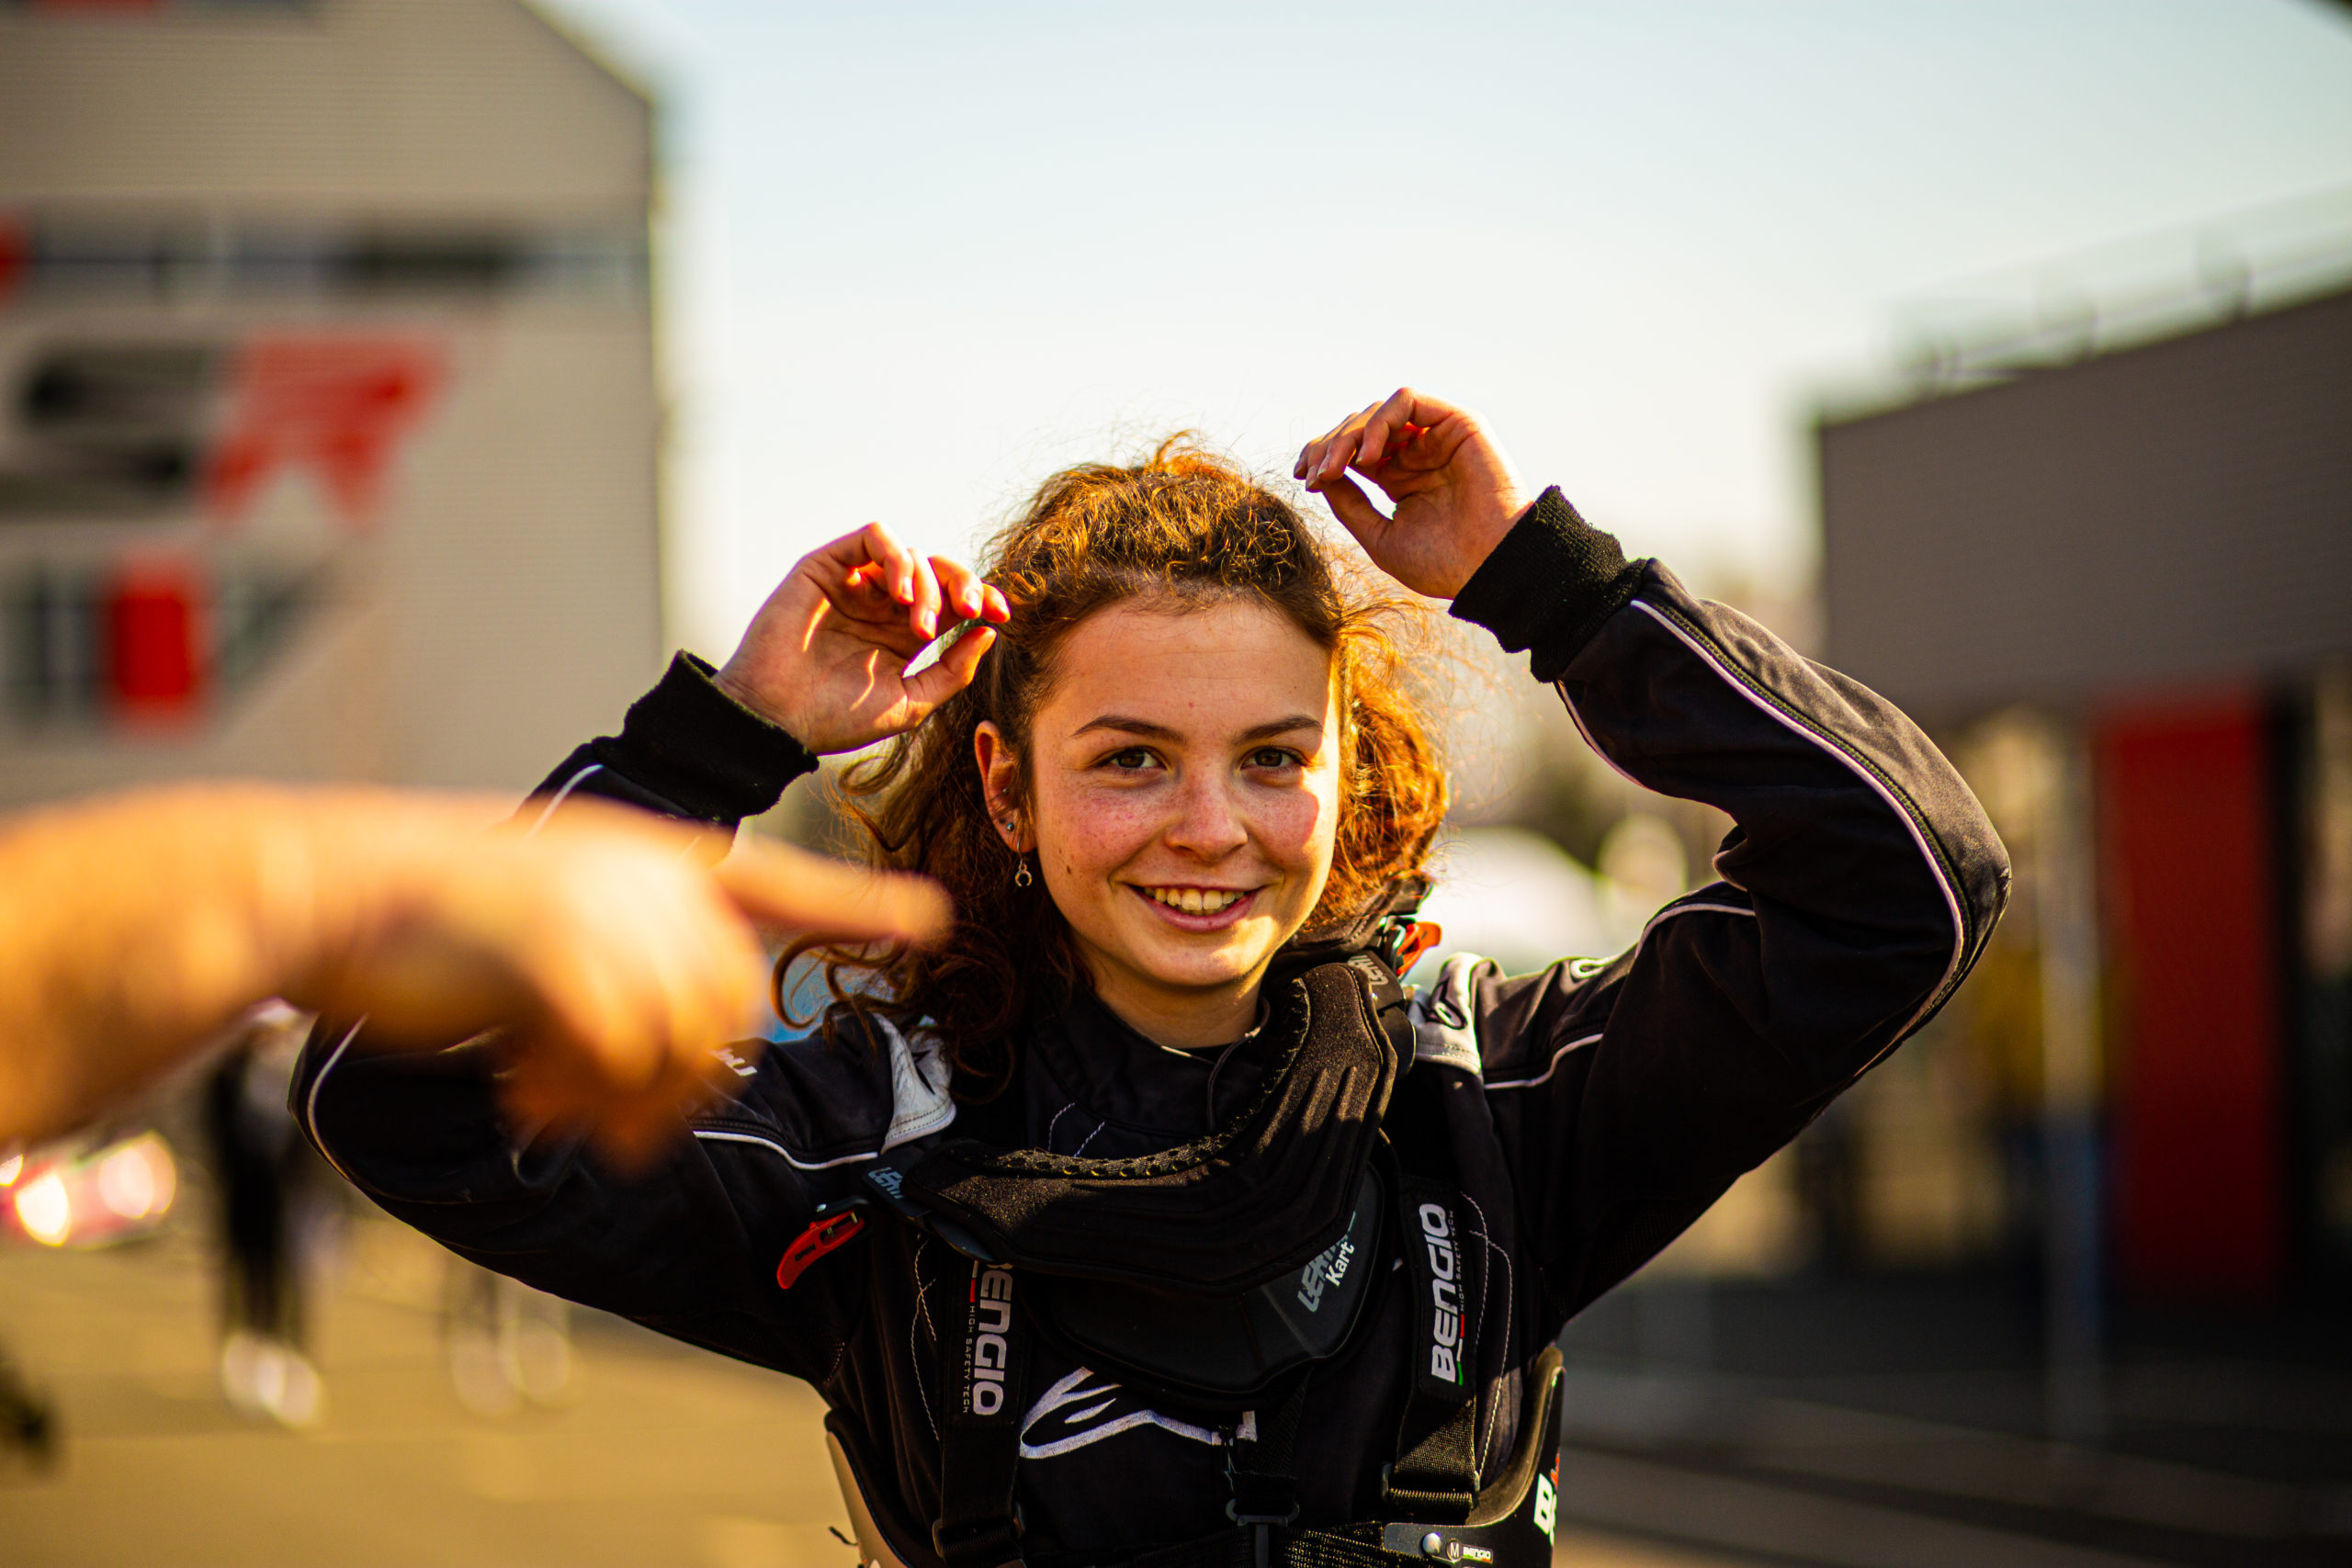 I don’t plan to be at the end of the field, says F4 debutant Michelle Jandová.